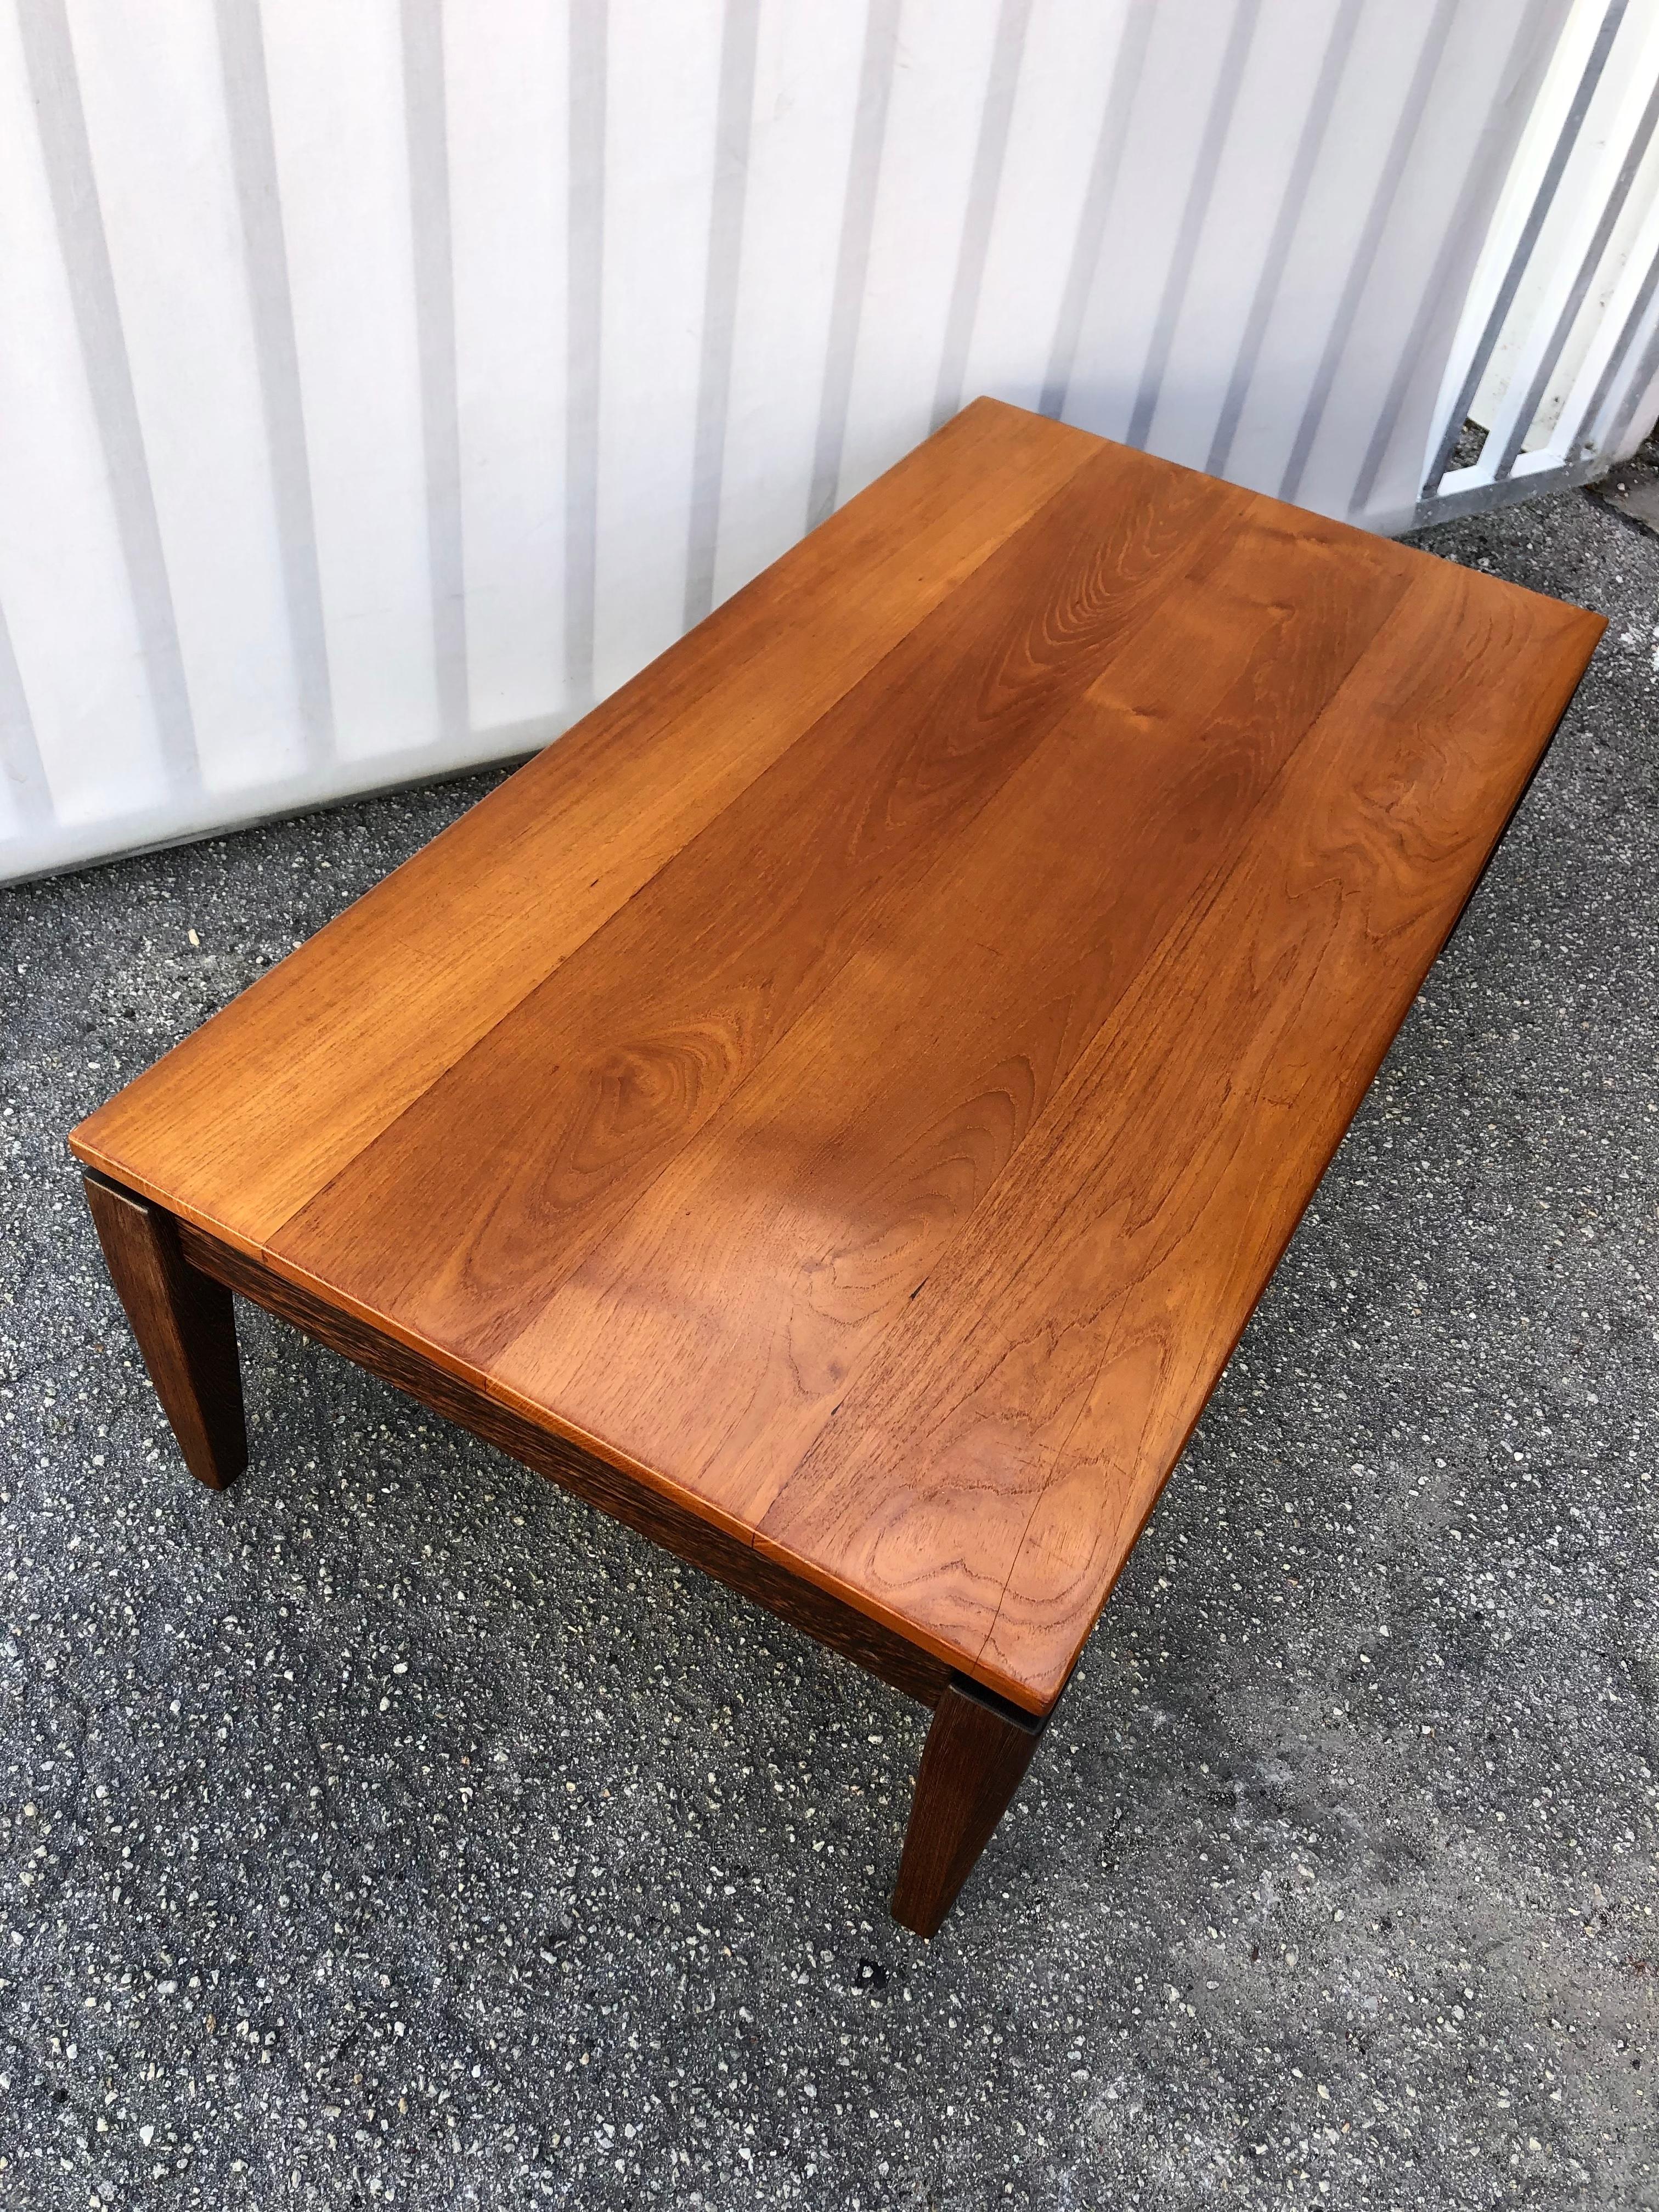 Vintage Mid Century Modern Custom Crafted Coffee Table In Good Condition For Sale In Miami, FL